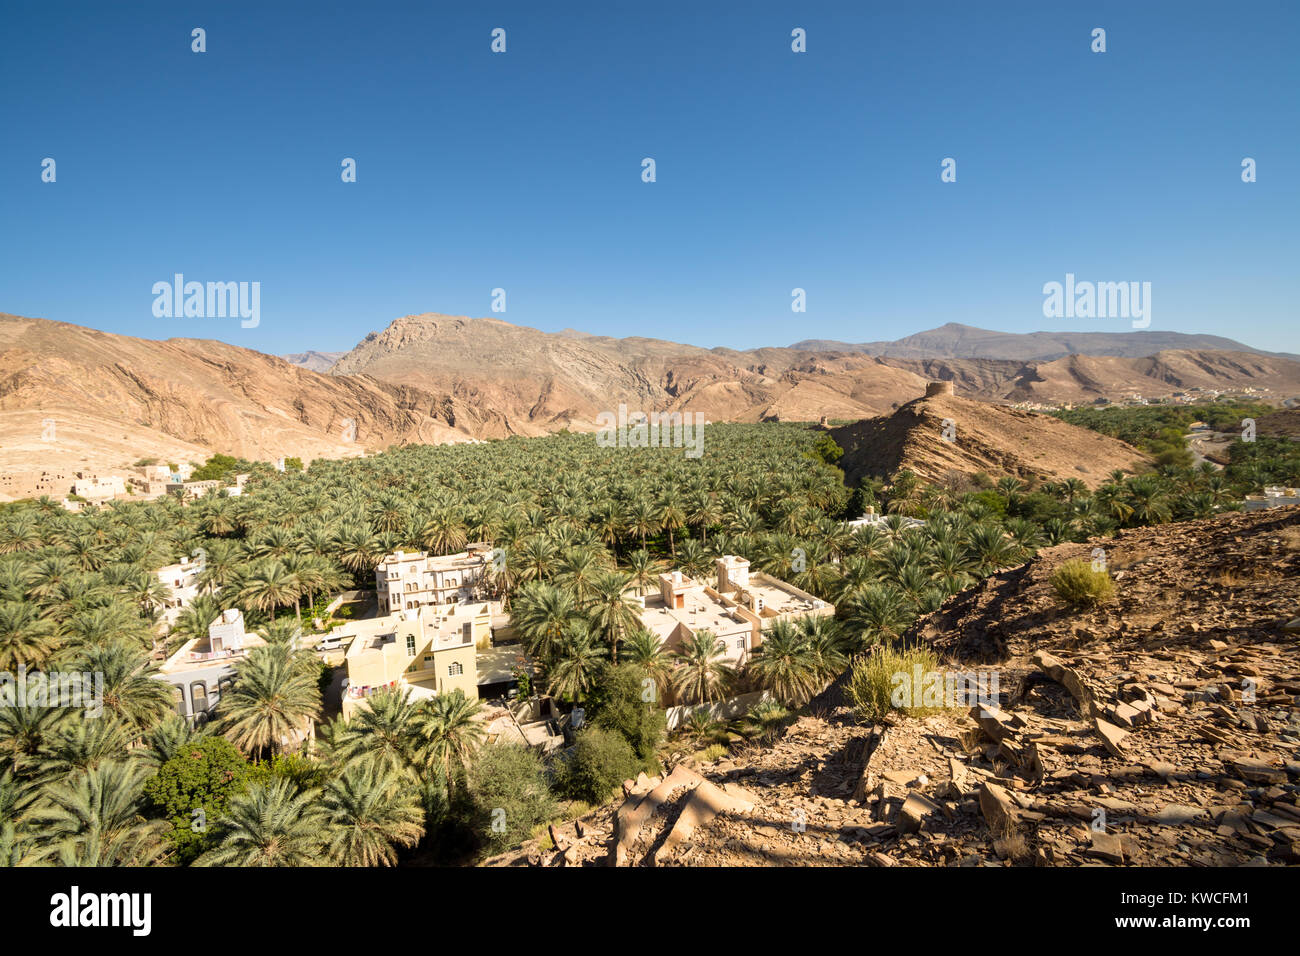 Oasis Panorama Omani Mountains at Jabal Akhdar in Al Hajar Mountains, Oman at sunset. This place is 2000 meters above sea level. Stock Photo